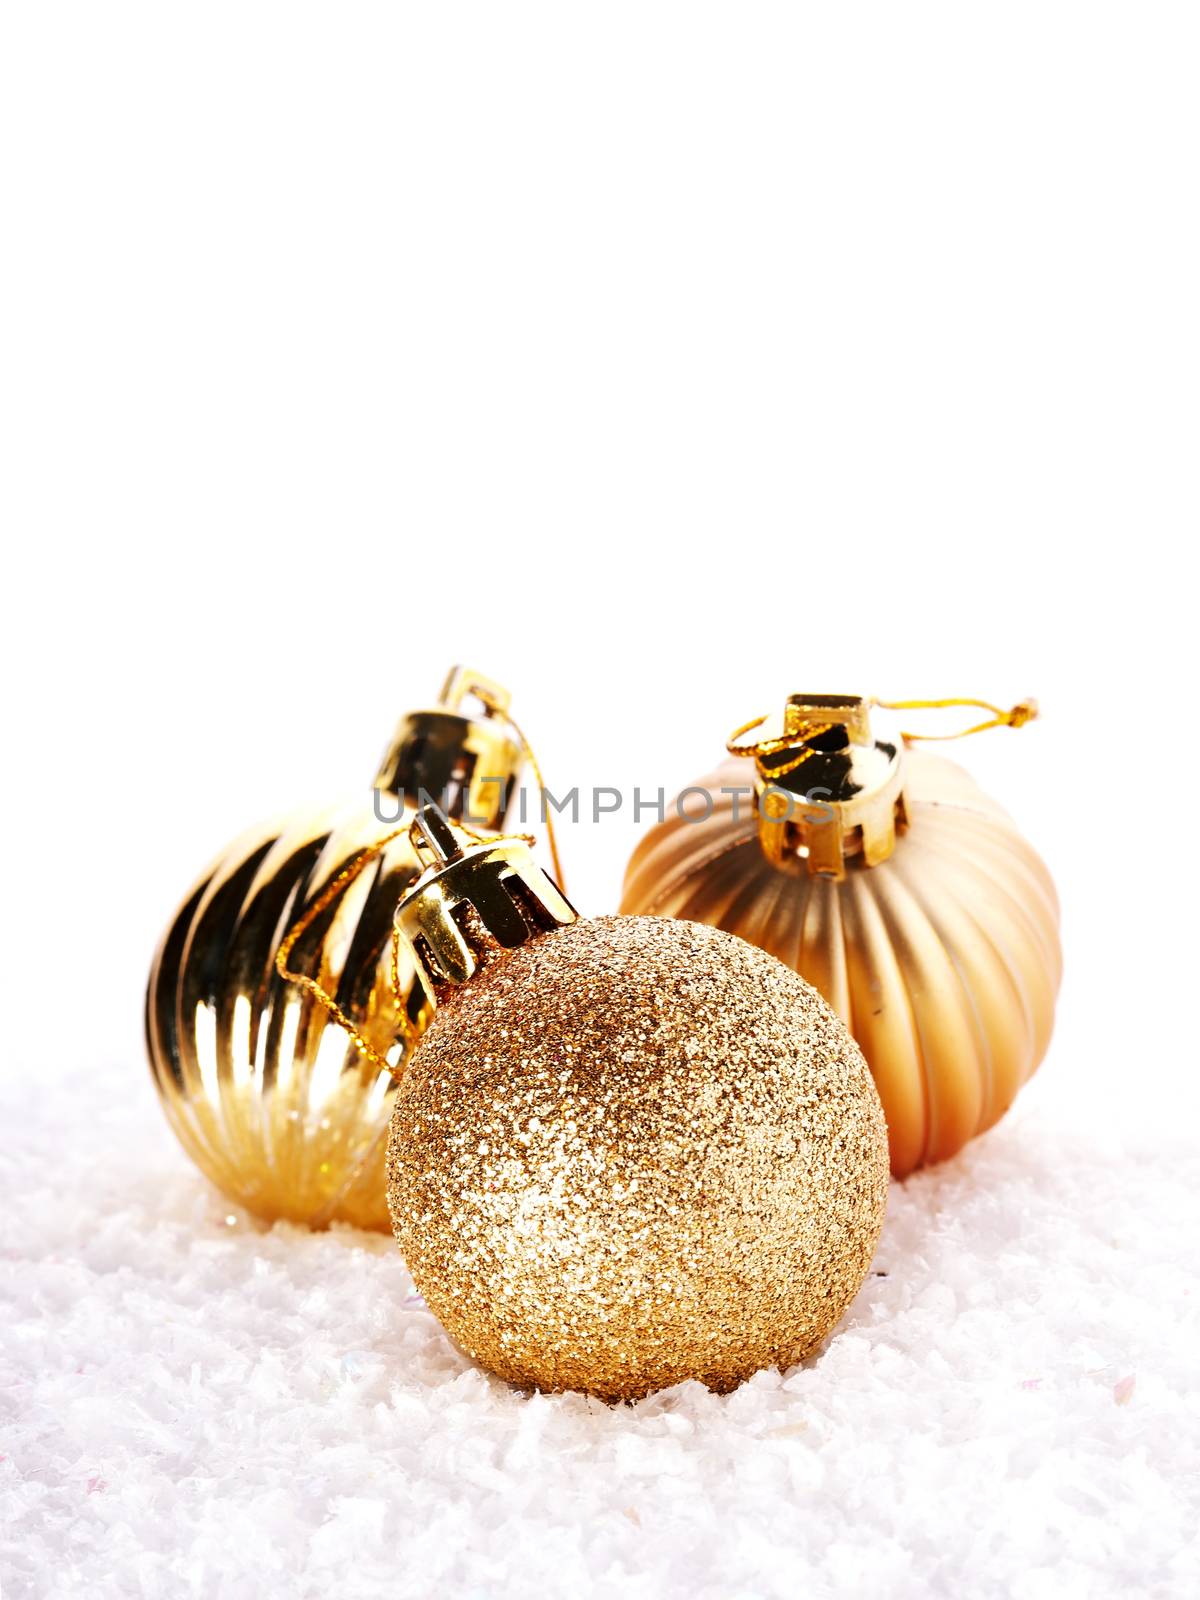 New Year's brilliant balls on snow. New Year's golden balls. Christmas balls. Christmas tree decorations. Christmas jewelry.